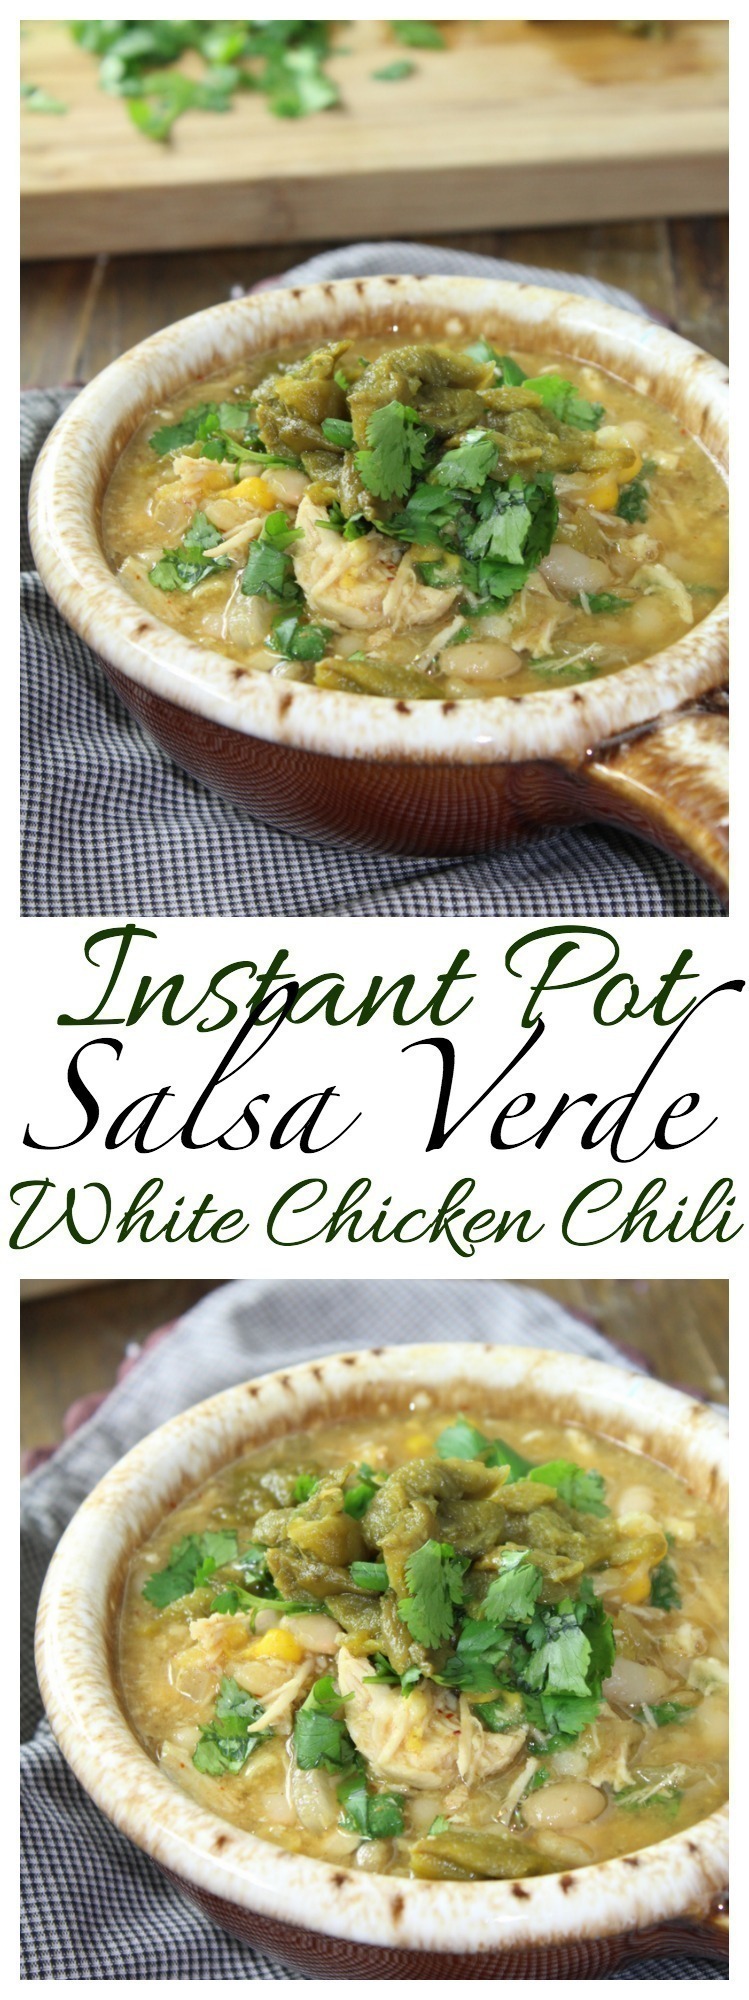 This Salsa Verde White Chicken Chili combines smoky green chiles, chicken and beans to make a comforting soup that's easy to make in the pressure cooker.